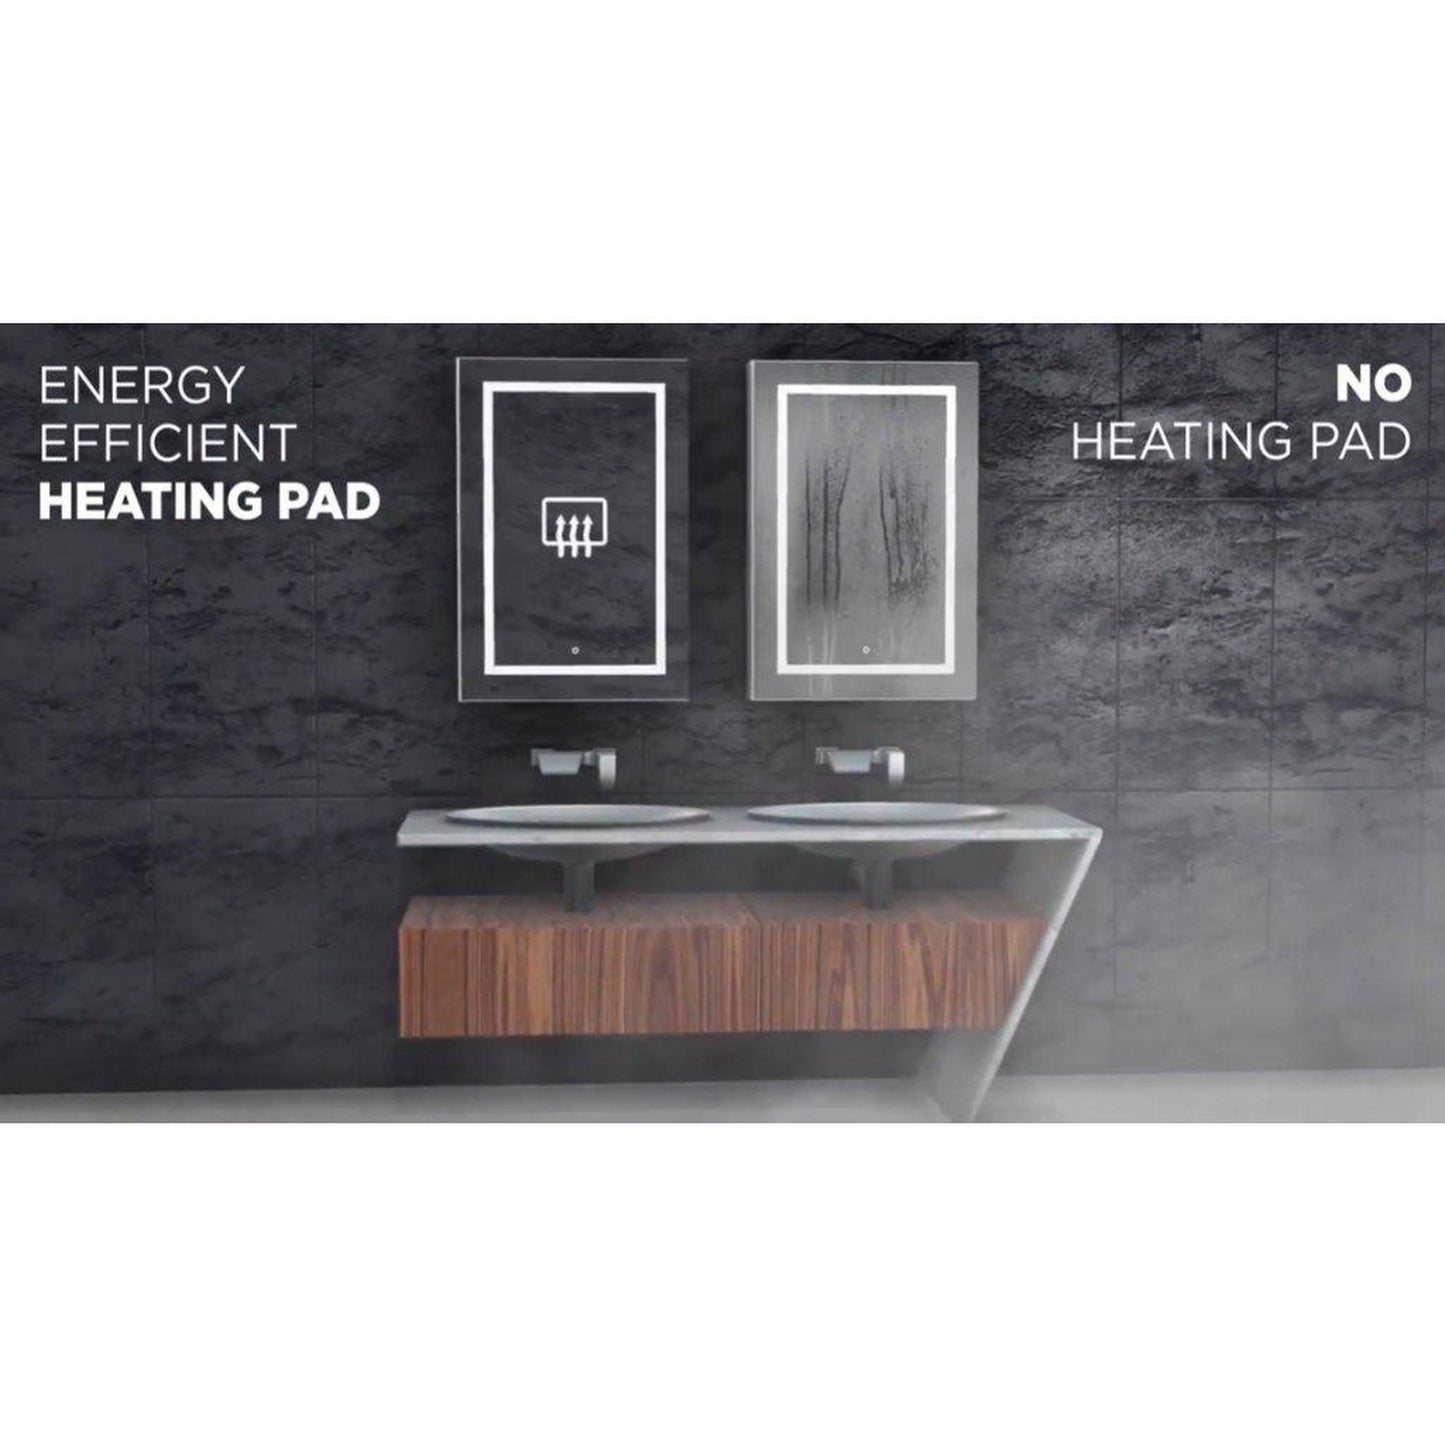 Krugg Reflections Stella 60" x 36" 5000K Rectangular Wall-Mounted Silver-Backed LED Bathroom Vanity Mirror With Built-in Defogger and Dimmer